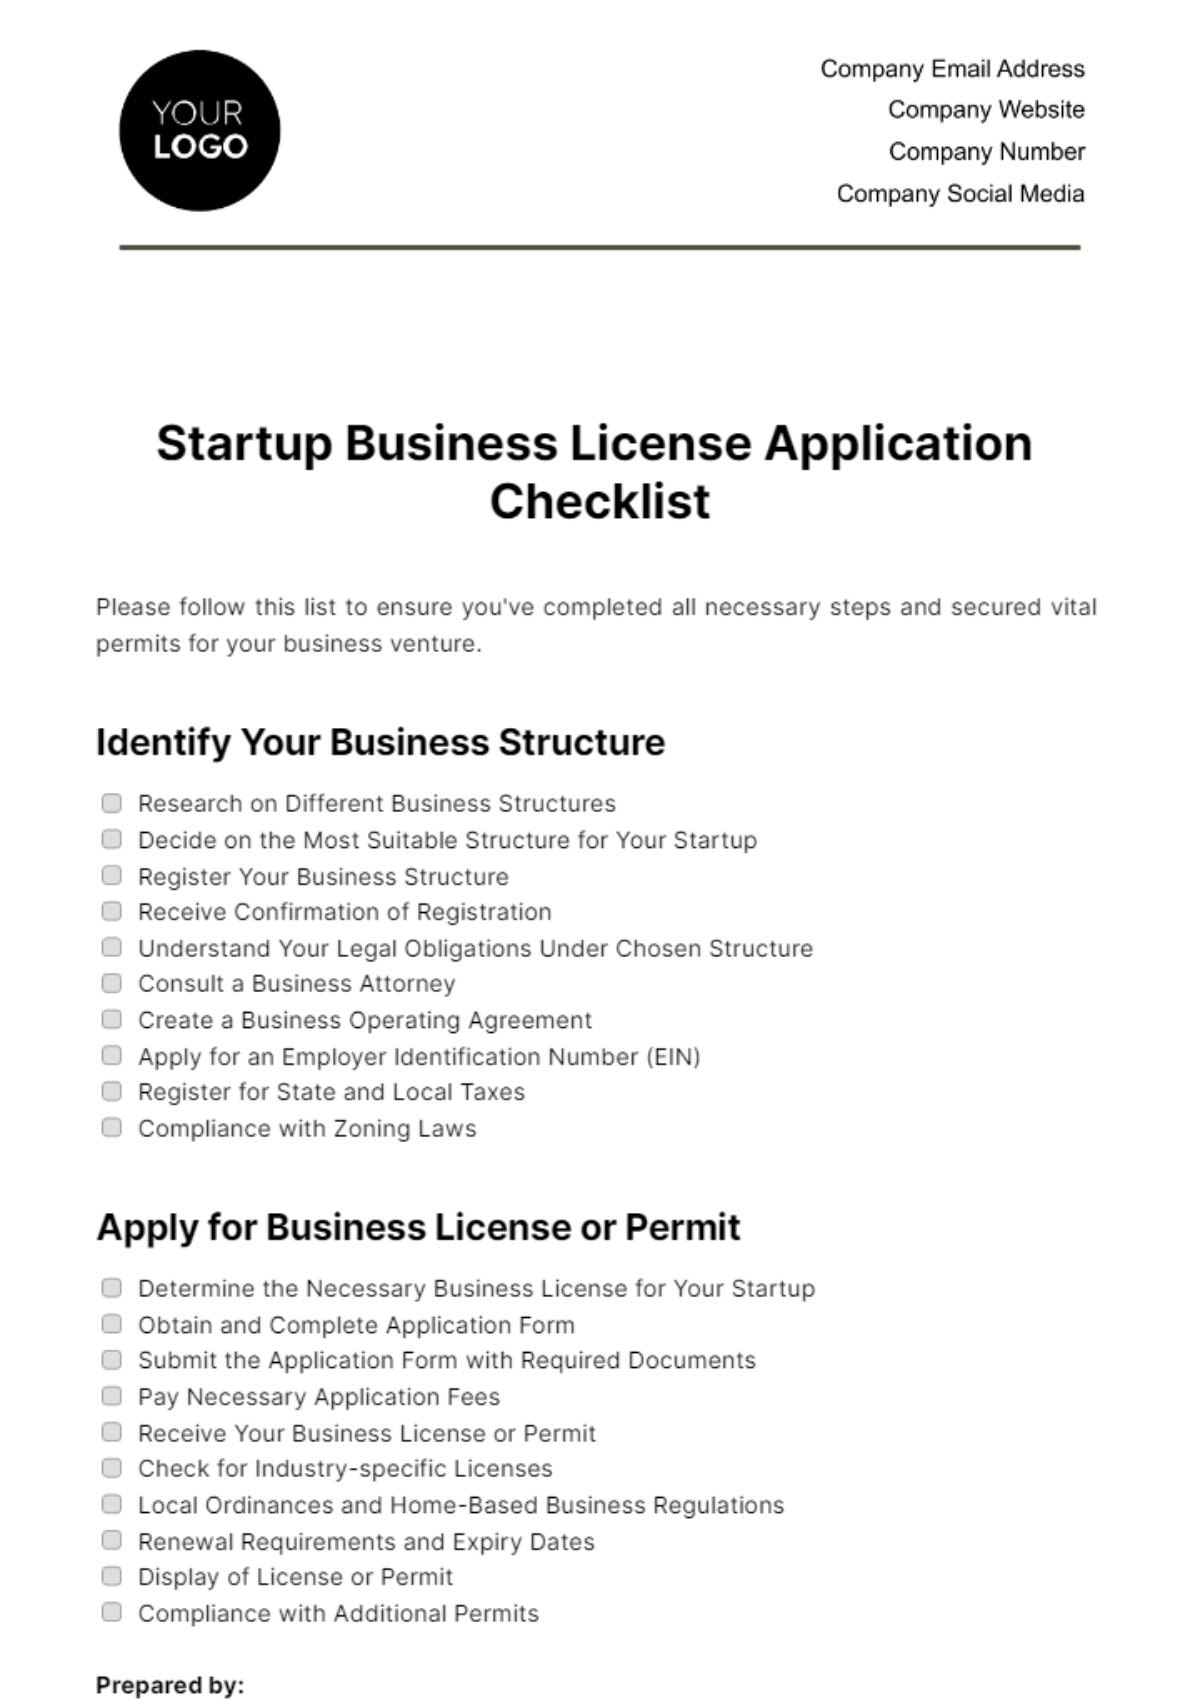 Free Startup Business License Application Checklist Template